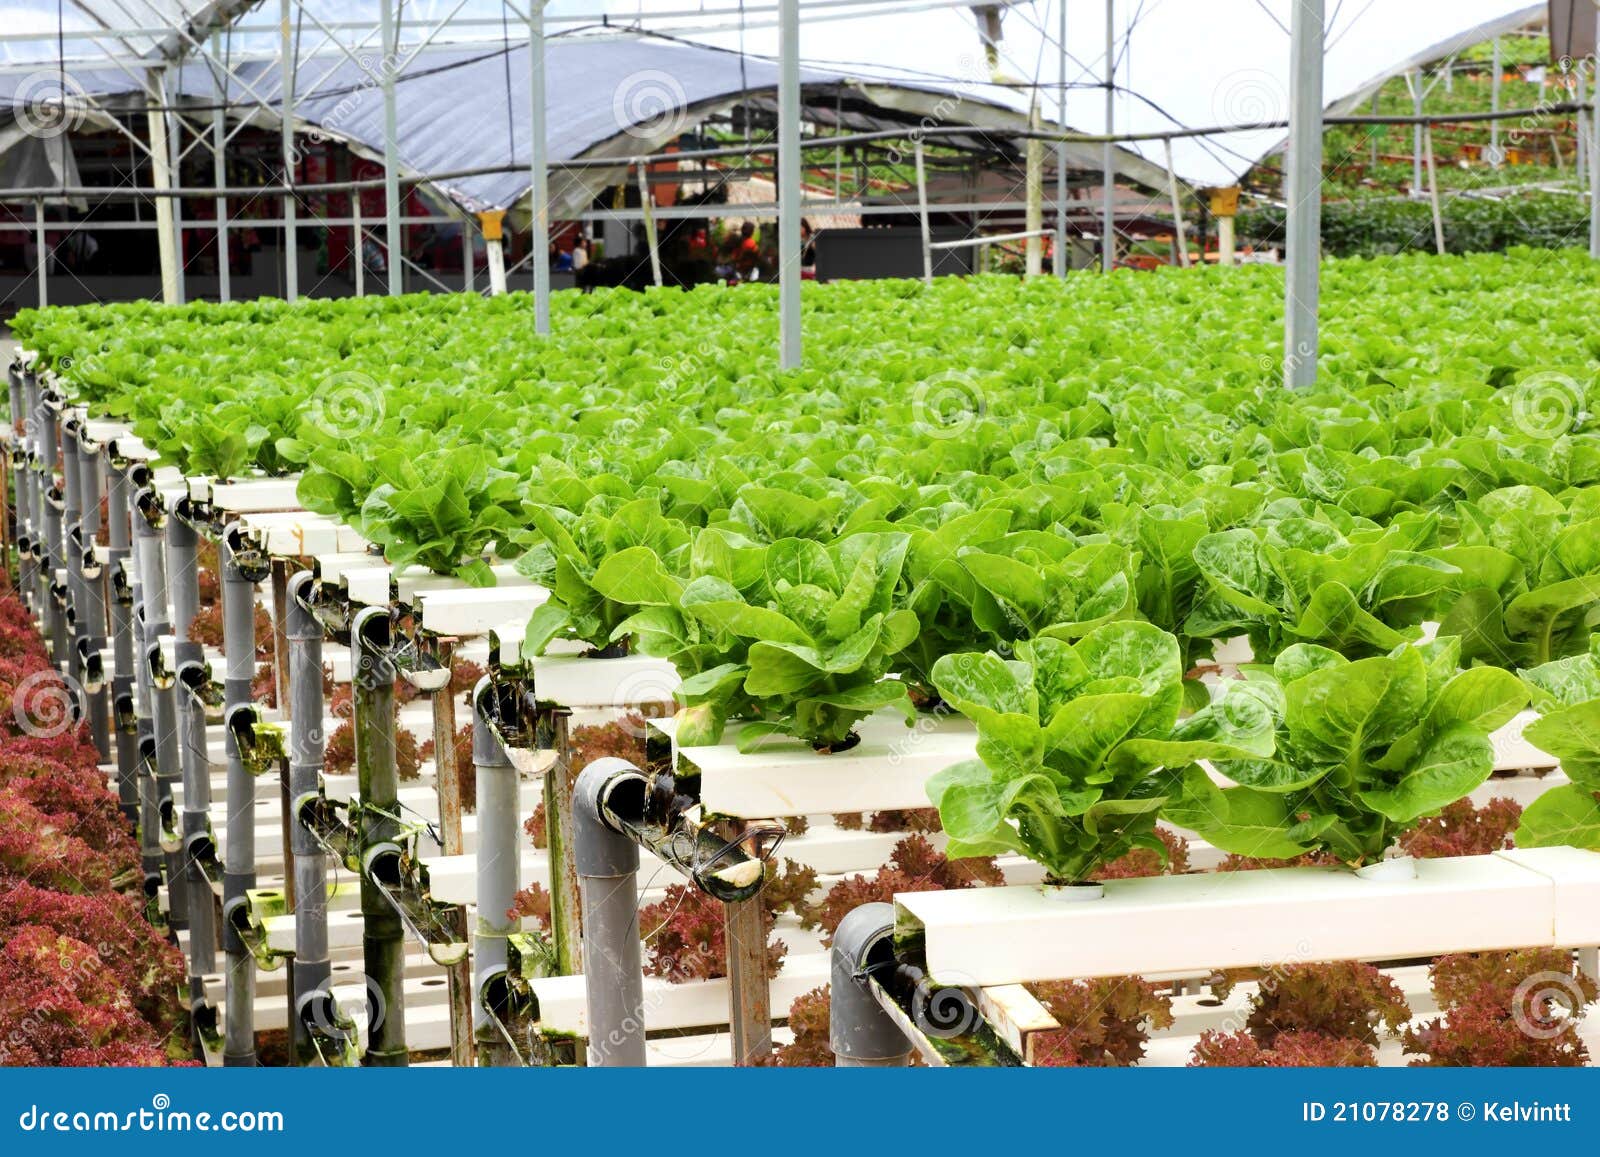 agriculture - hydroponic vegetable farm